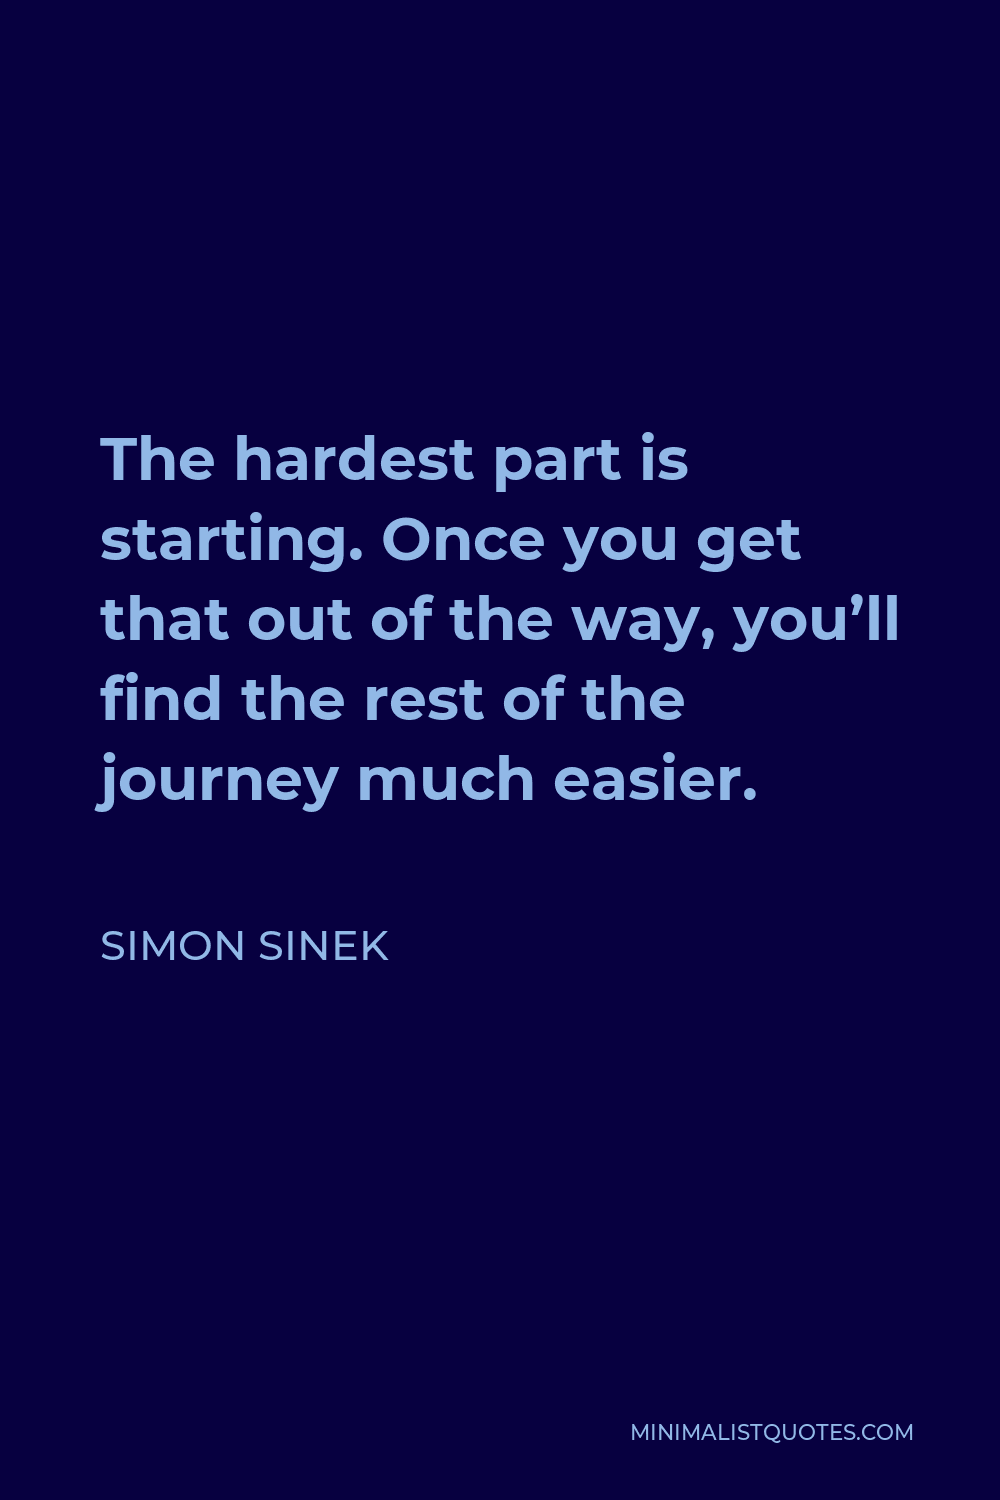 Simon Sinek Quote - The hardest part is starting. Once you get that out of the way, you’ll find the rest of the journey much easier.